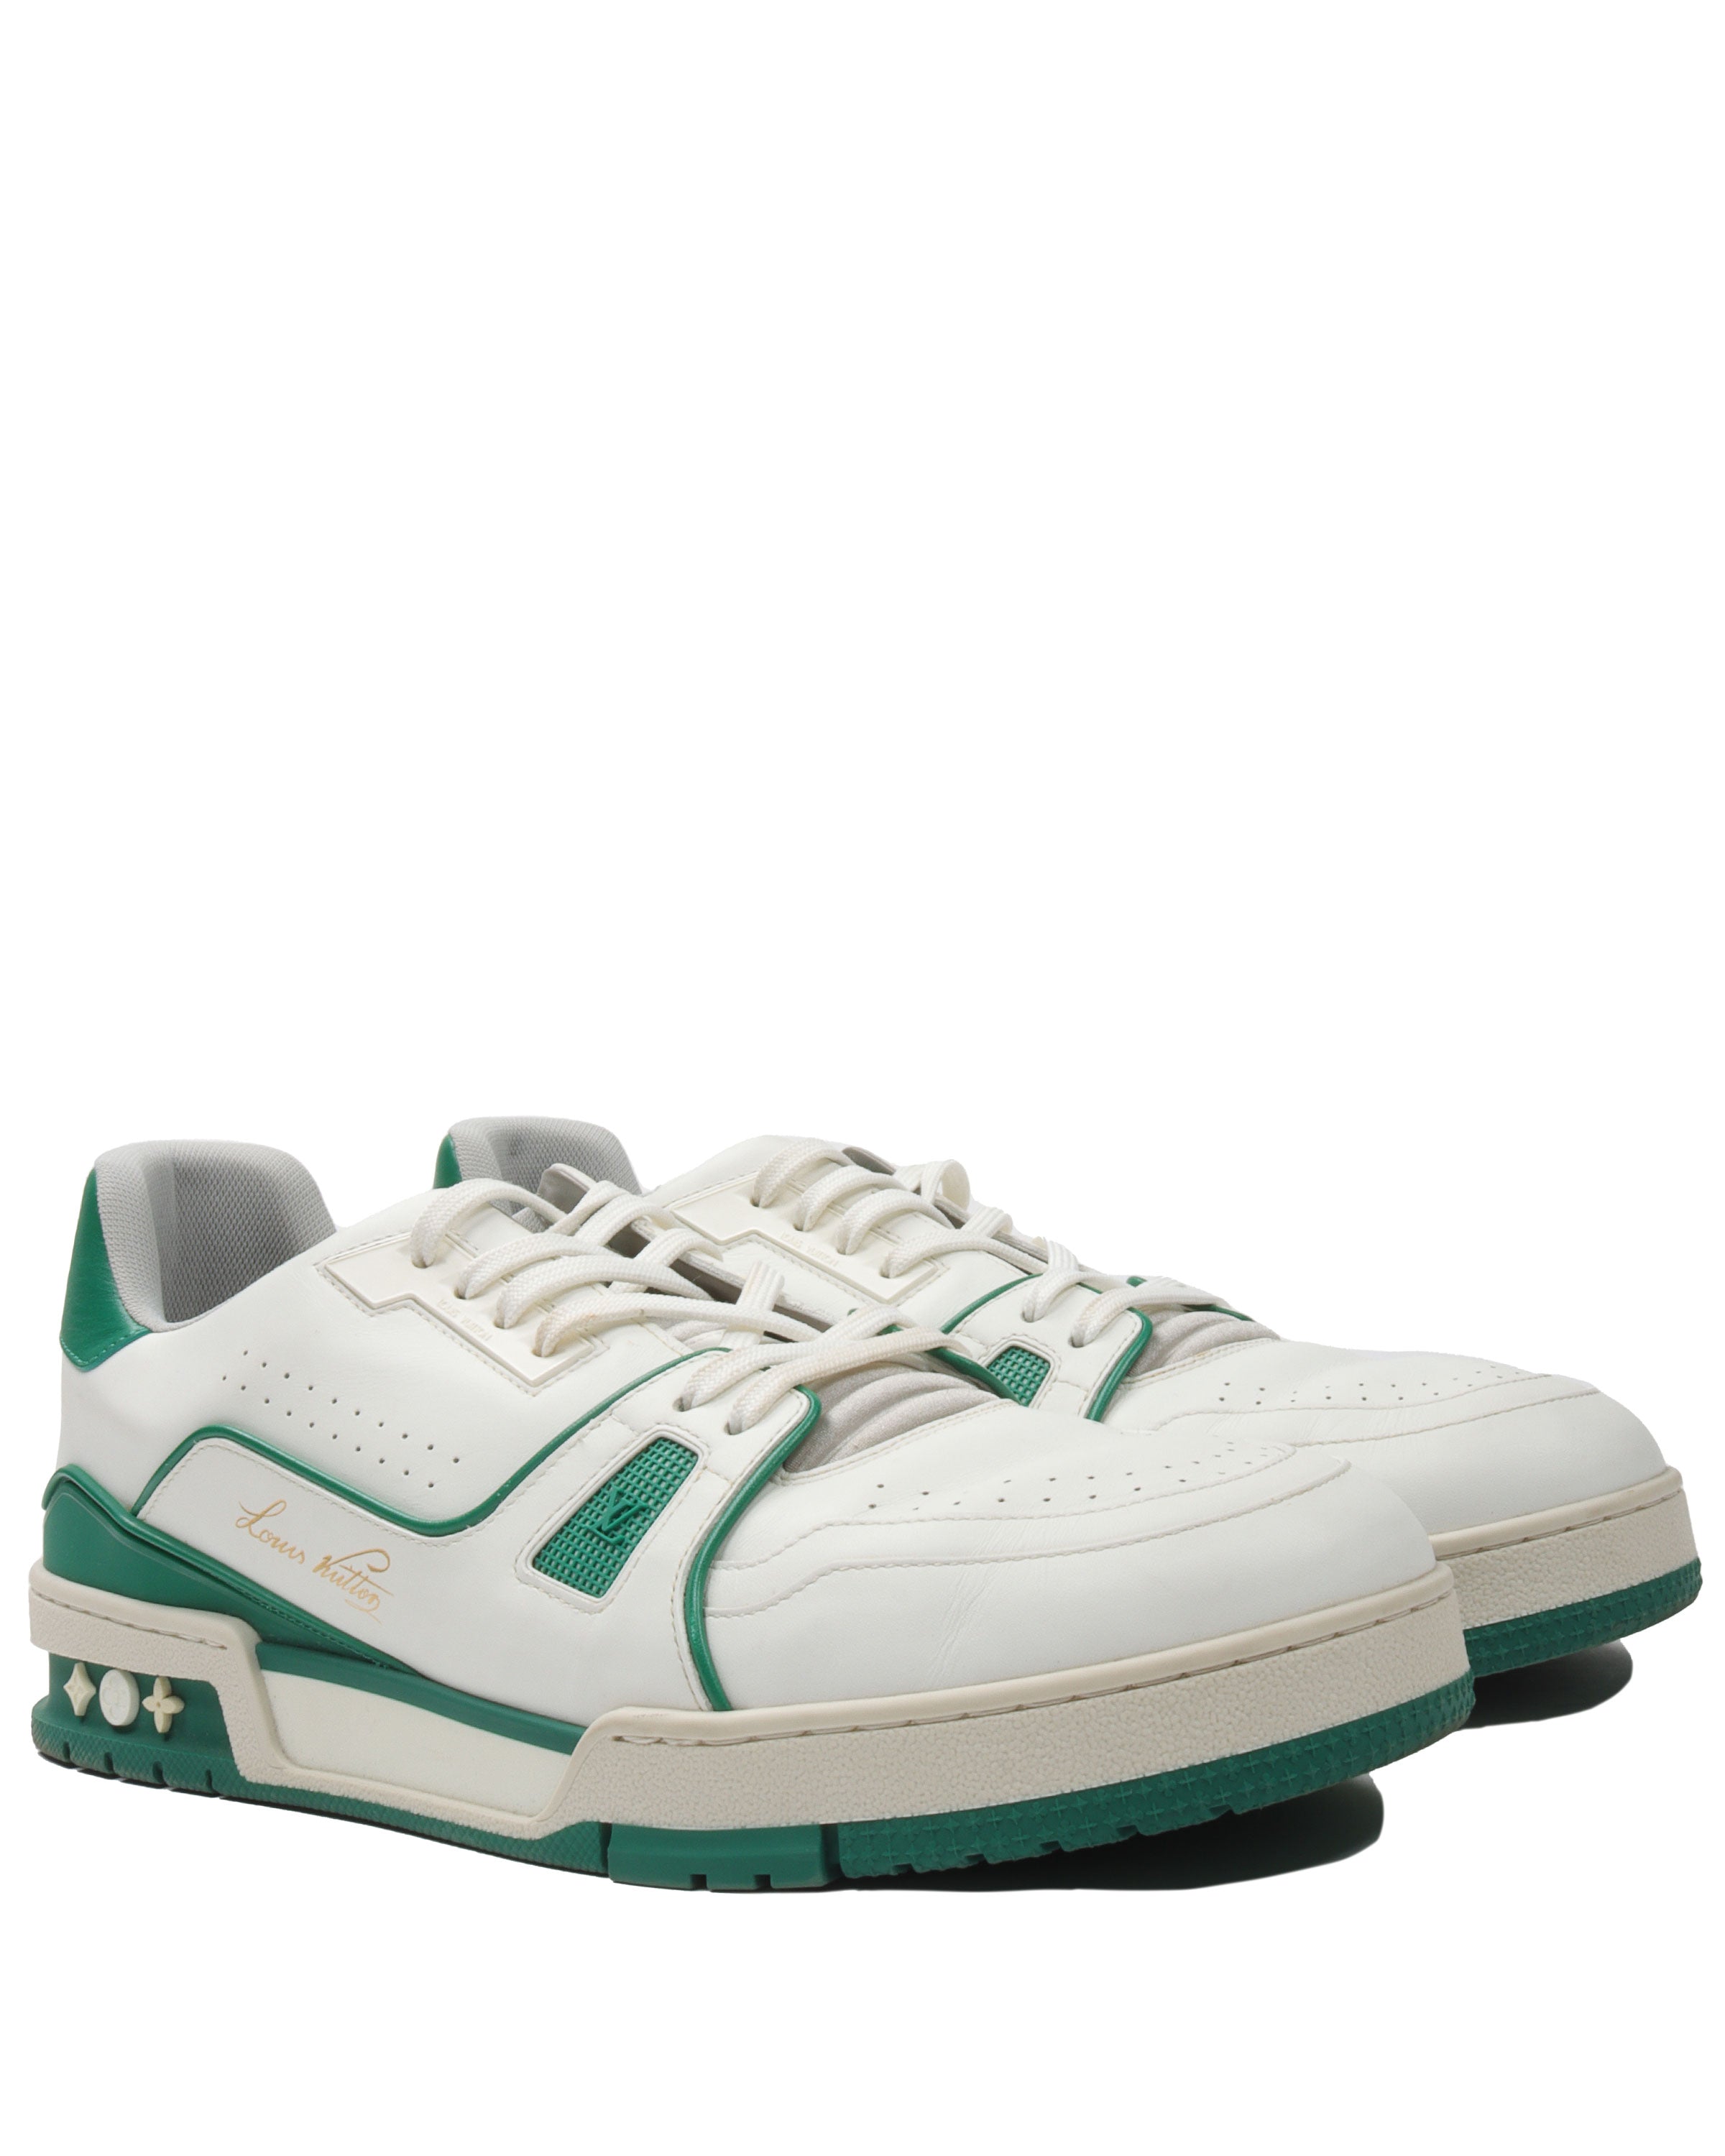 LOUIS VUITTON ARGENT GREEN PATENT SNEAKERS SIZE: 9 / Fits UK10